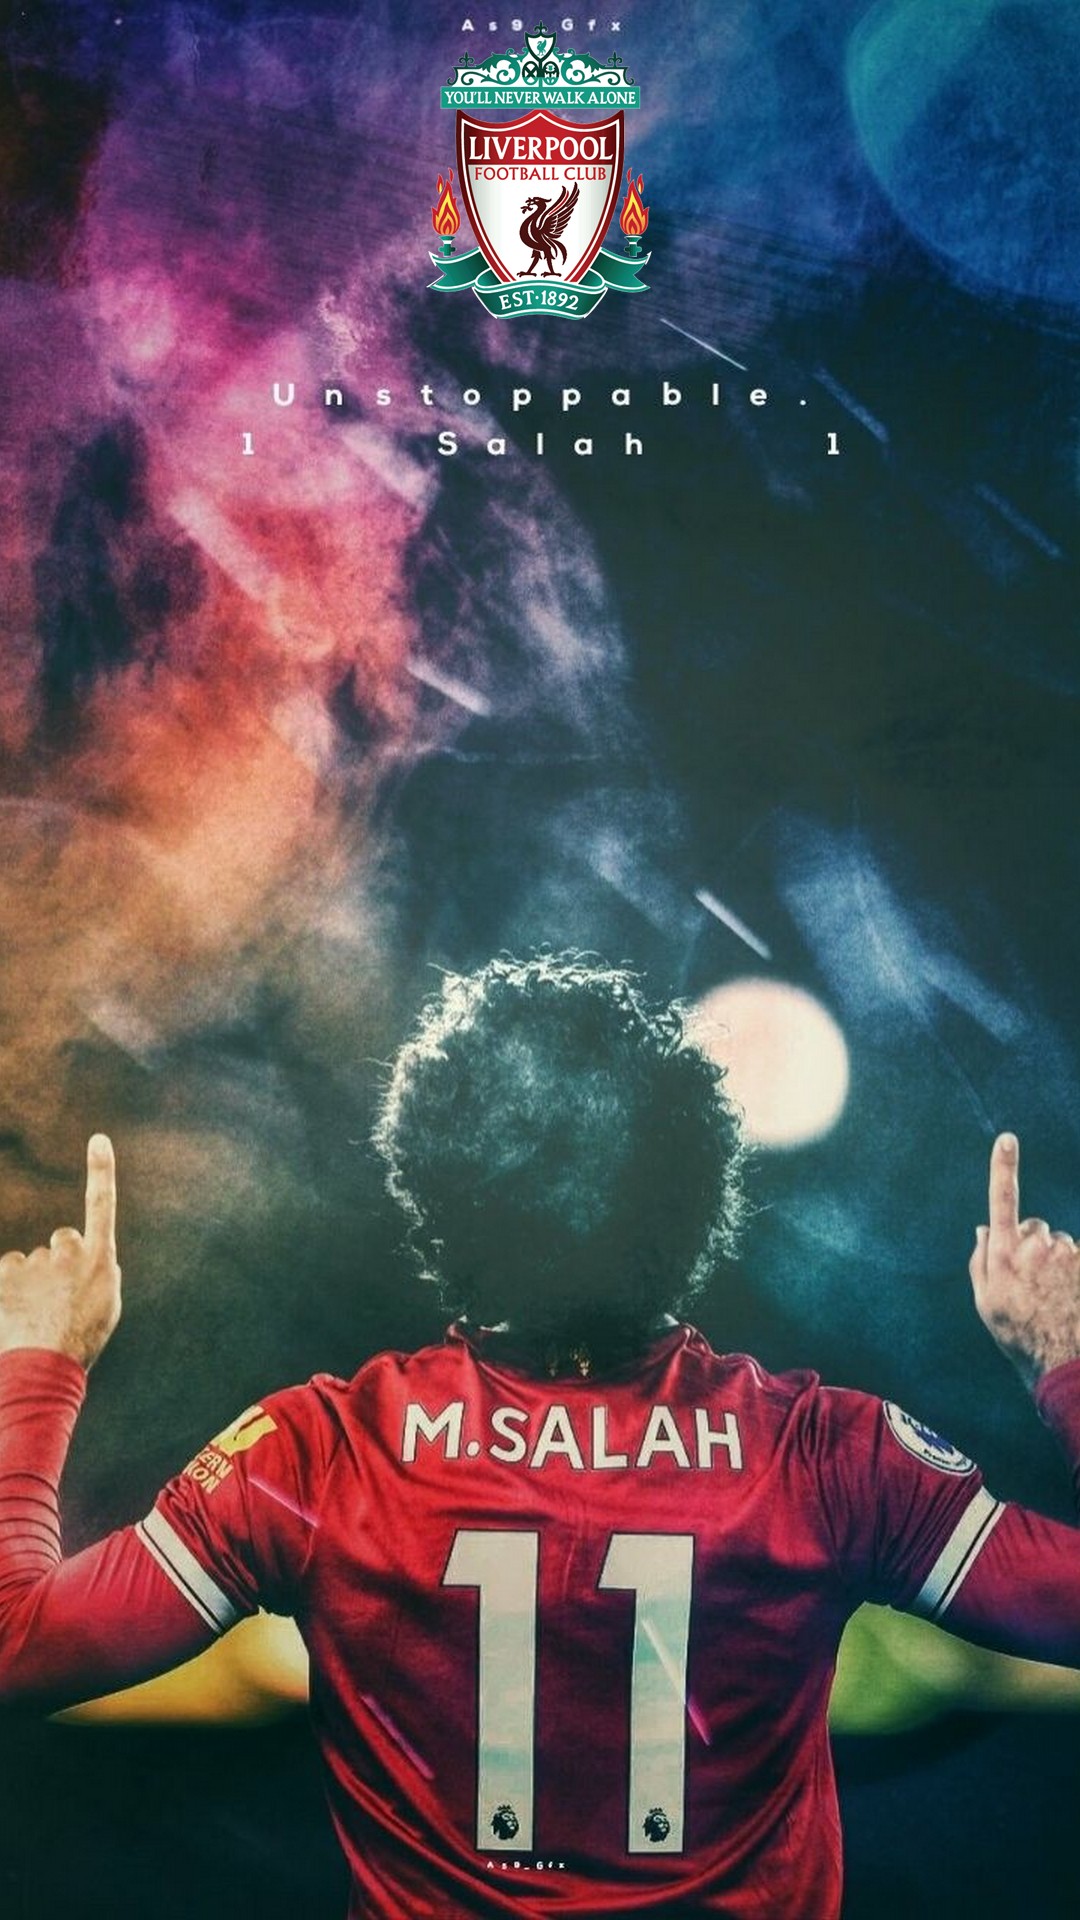 Wallpaper iPhone Mo Salah with image resolution 1080x1920 pixel. You can make this wallpaper for your iPhone 5, 6, 7, 8, X backgrounds, Mobile Screensaver, or iPad Lock Screen